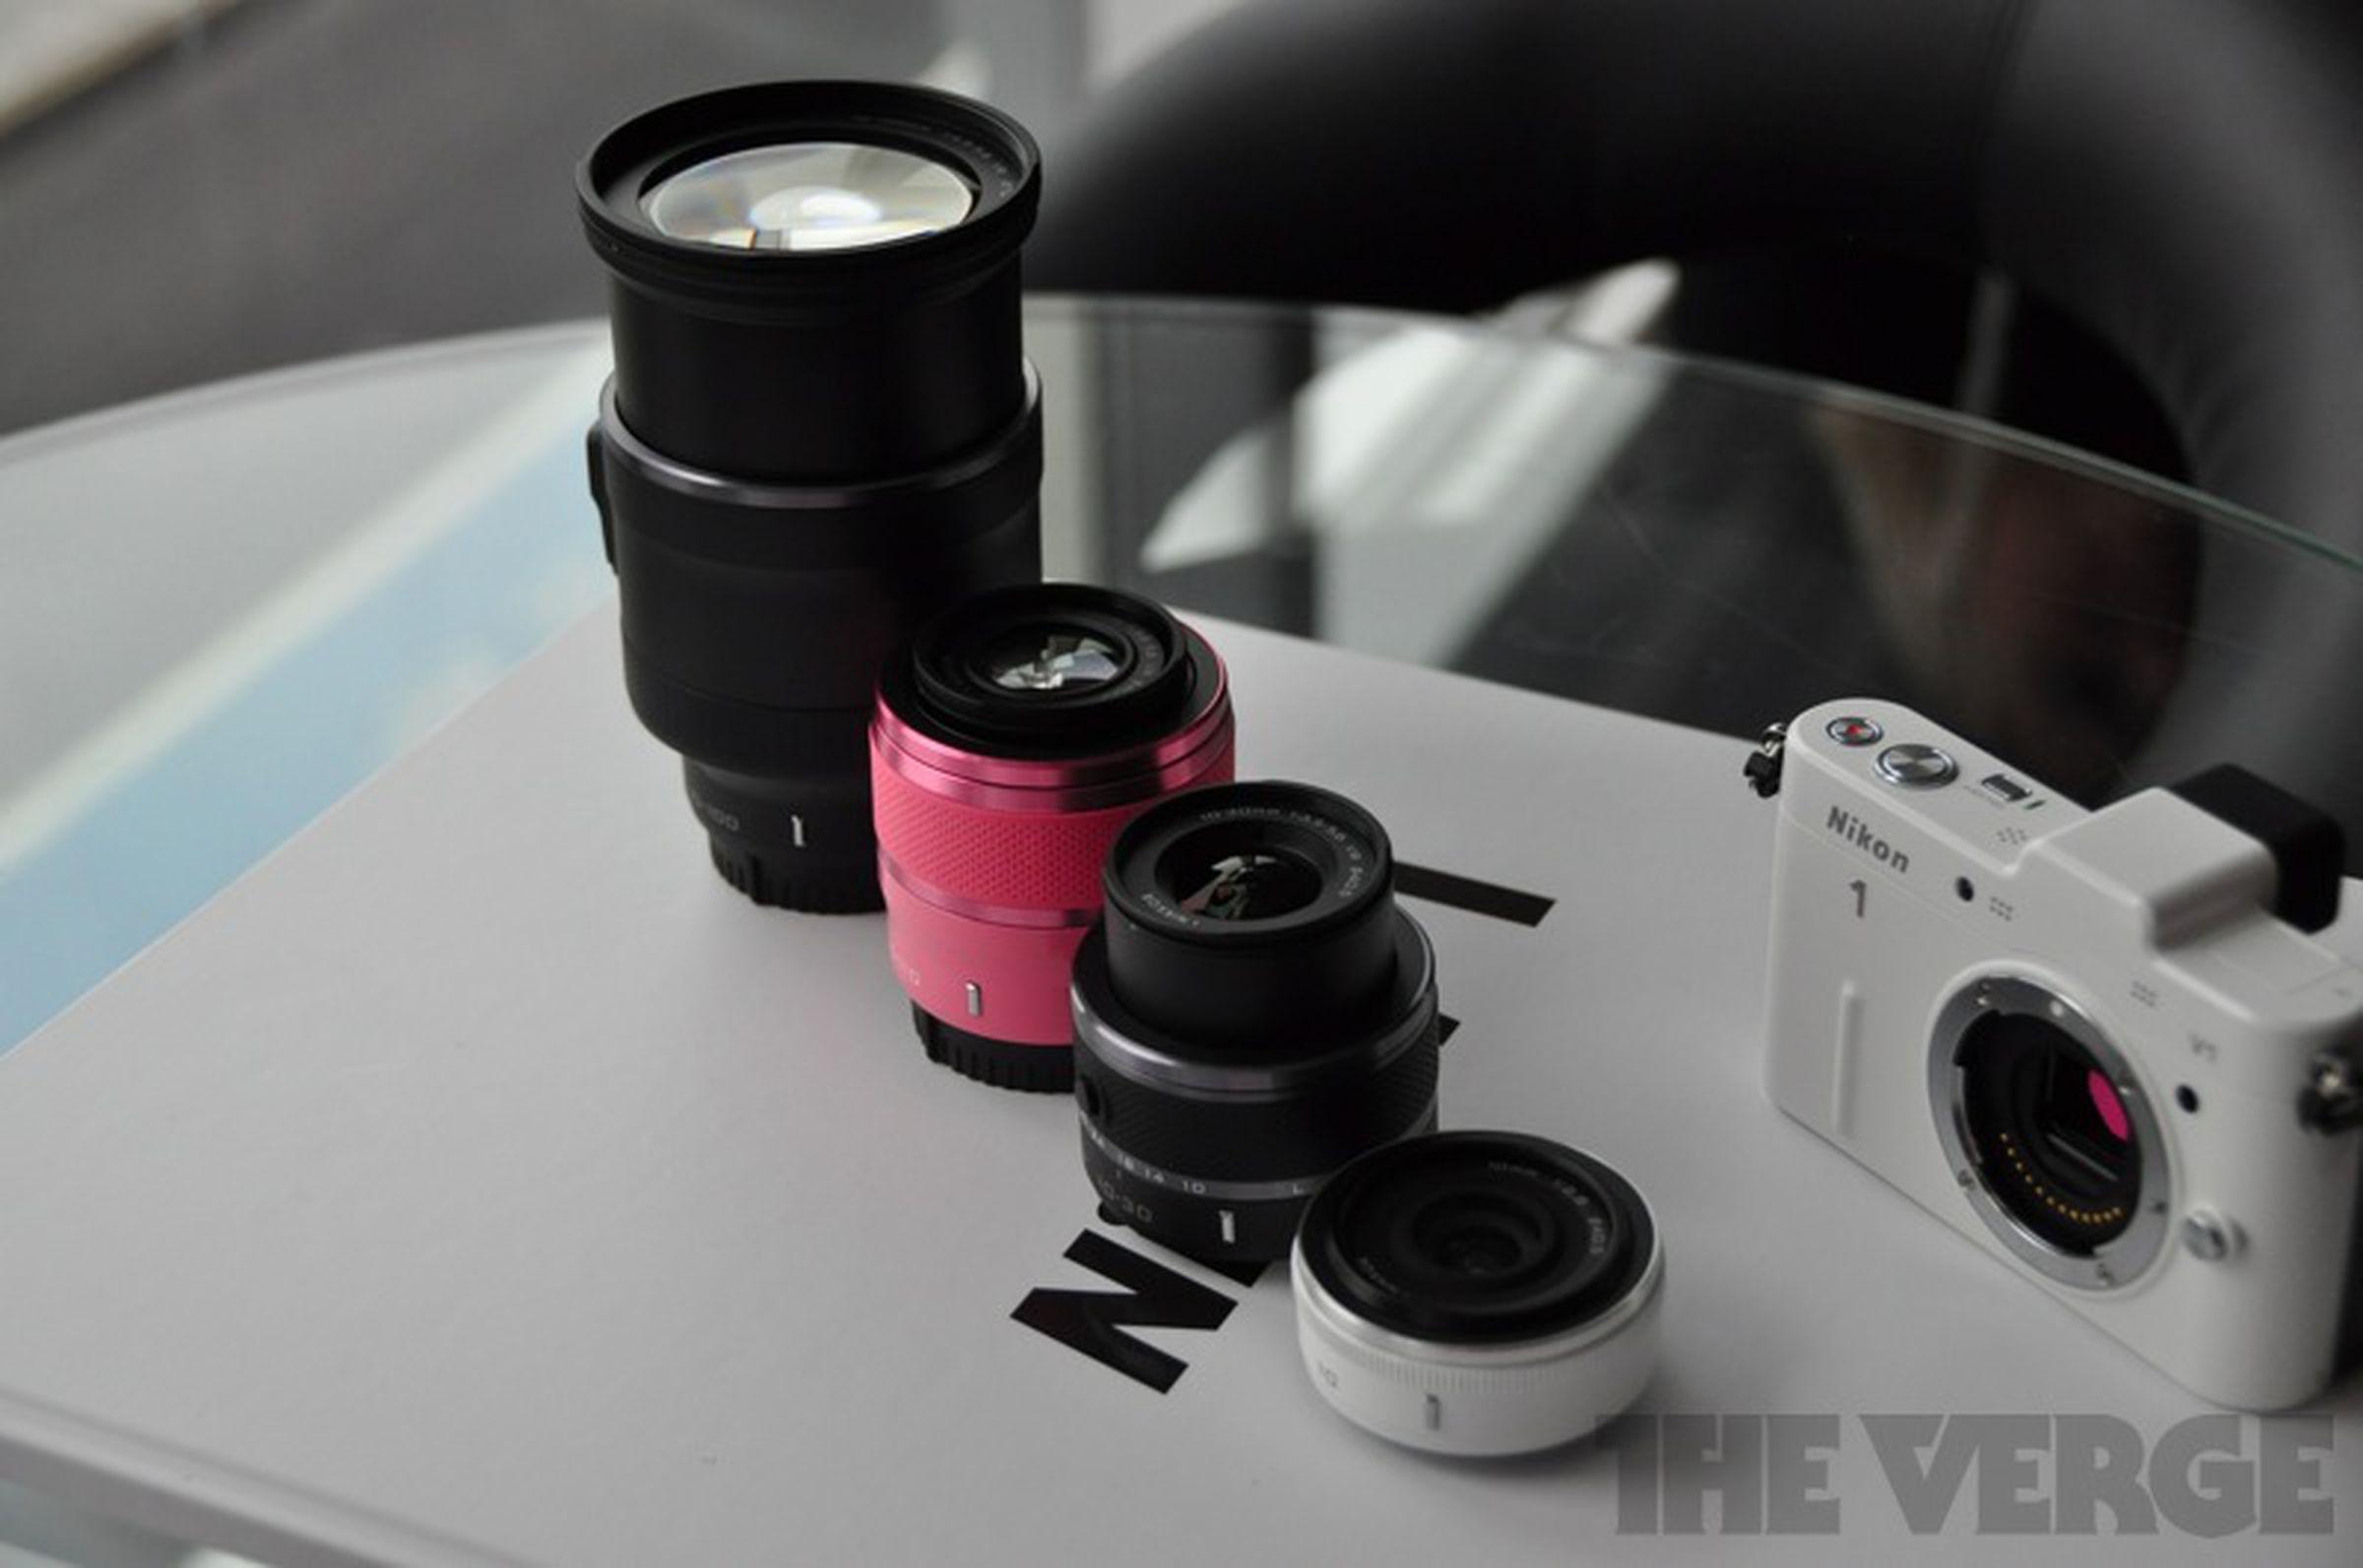 Nikon V1 and J1 hands-on pictures